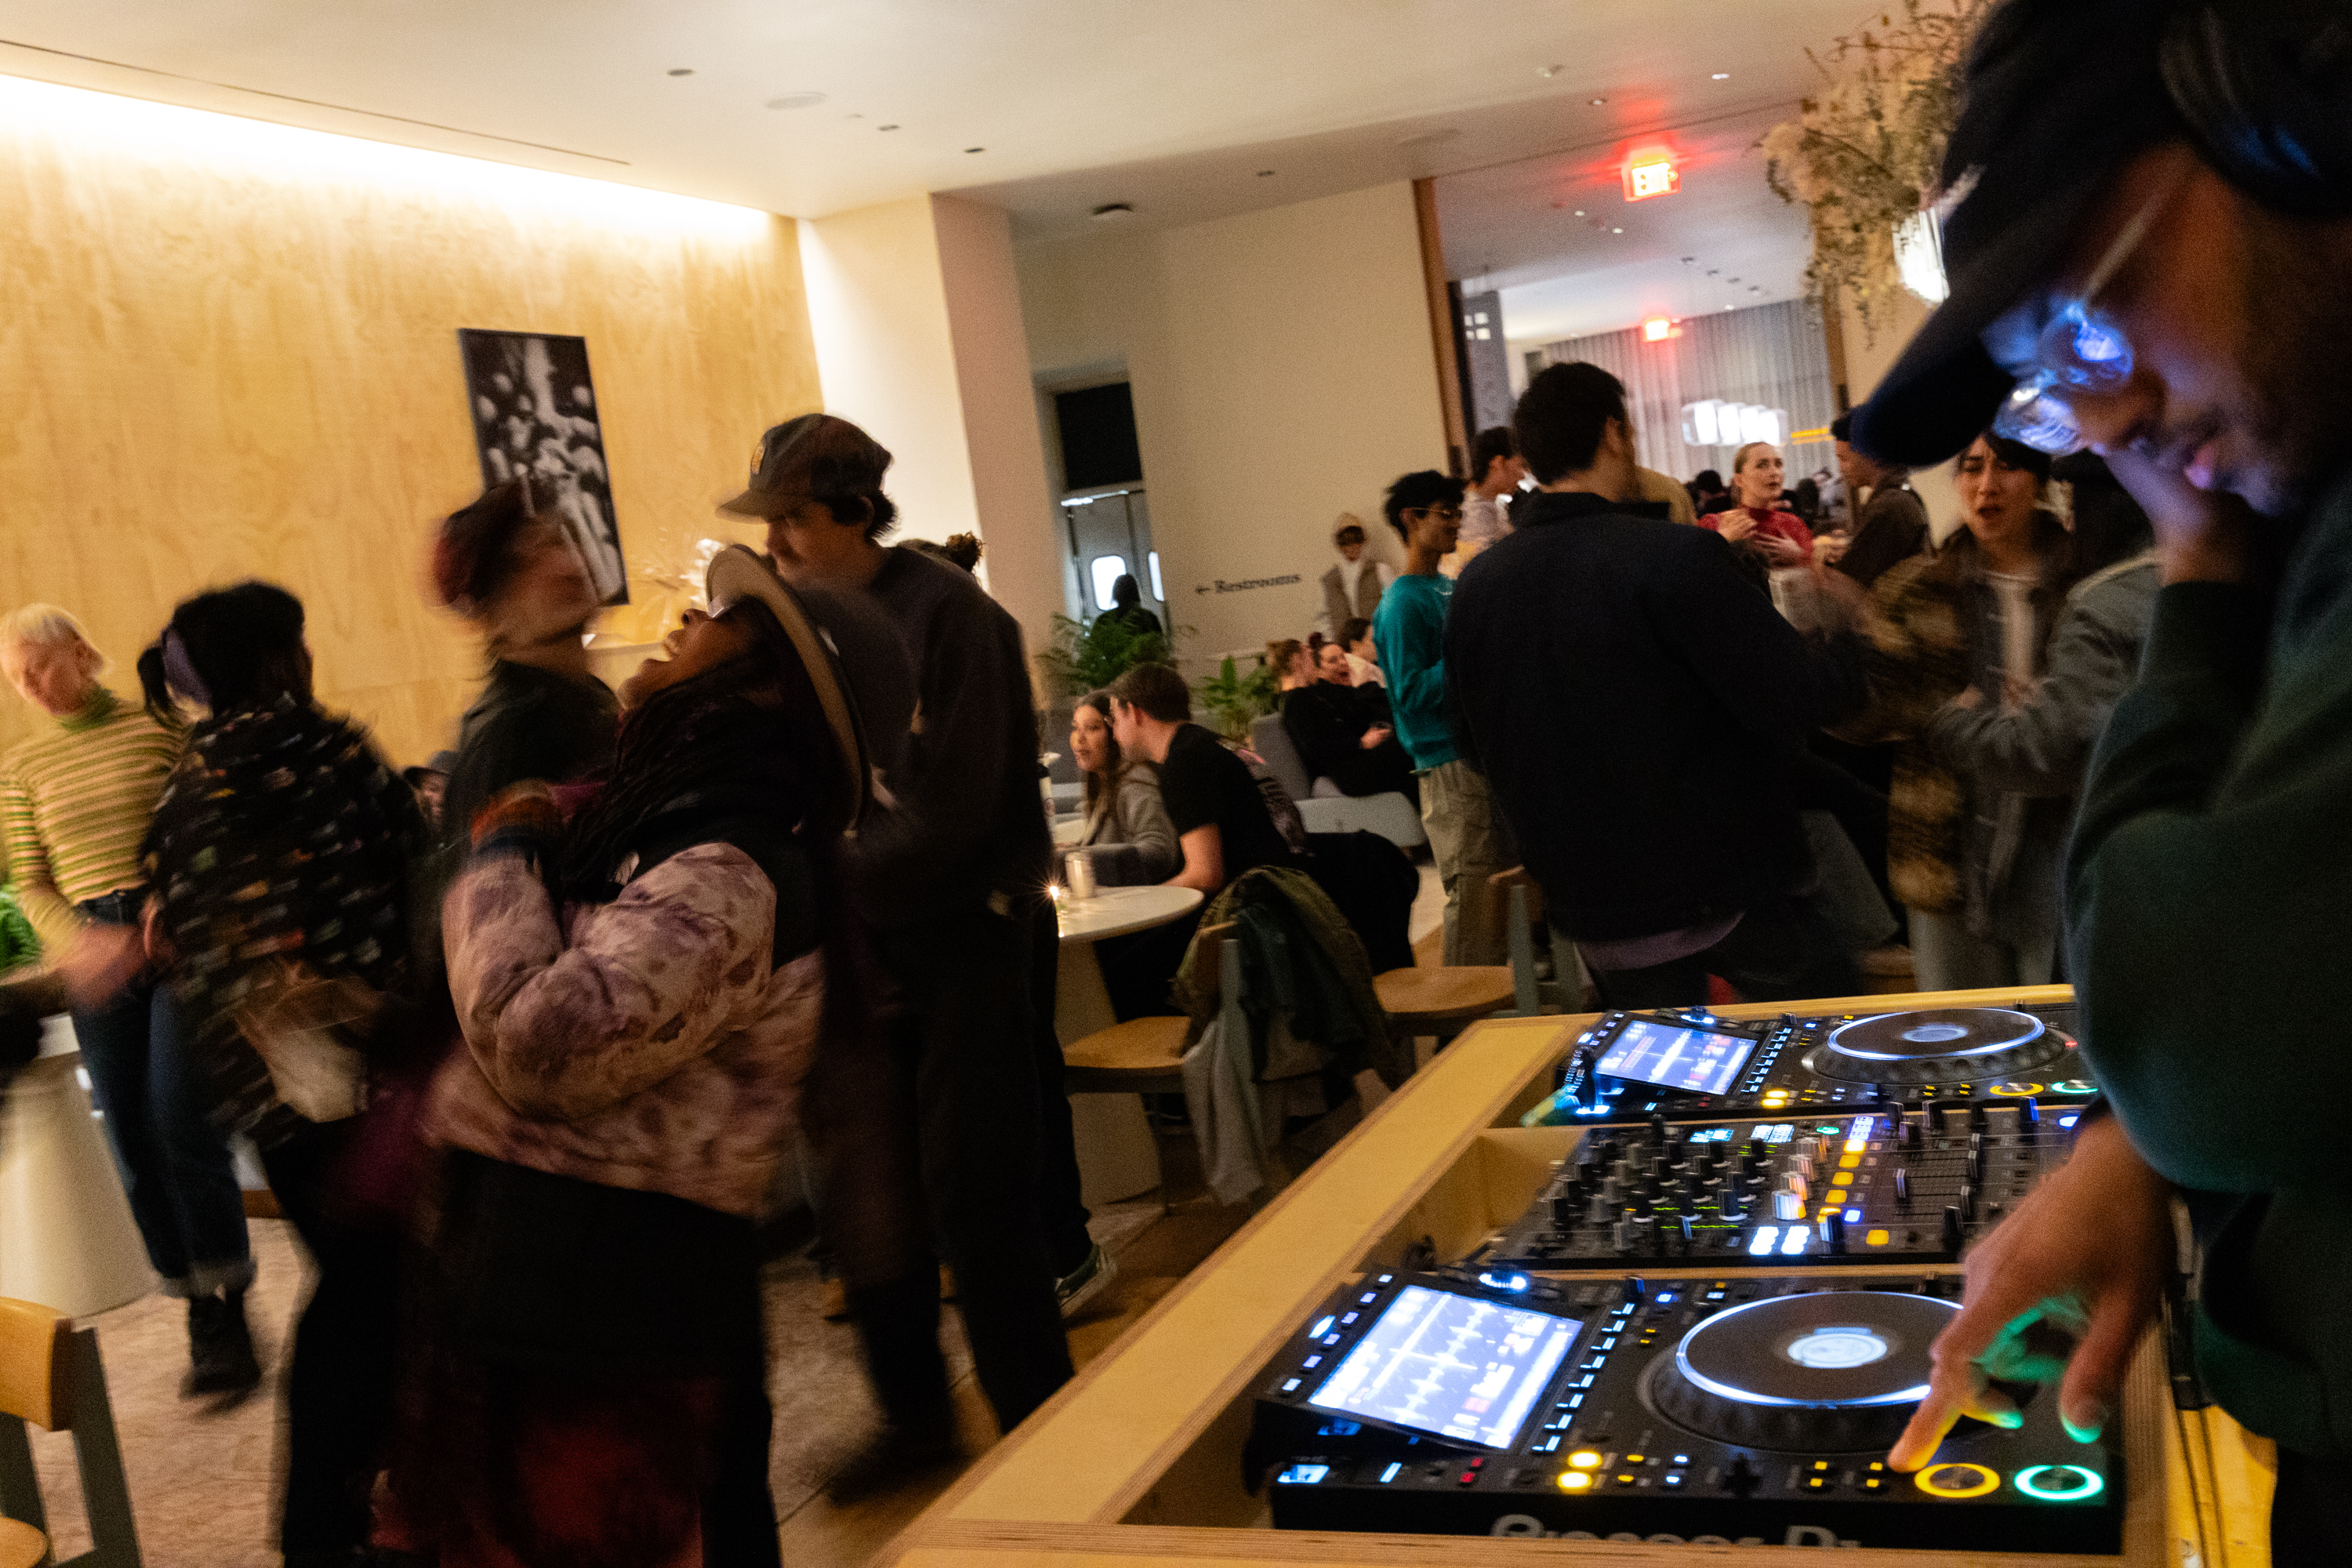 A DJ at a mixer with people mingling in a dimly lit indoor space.